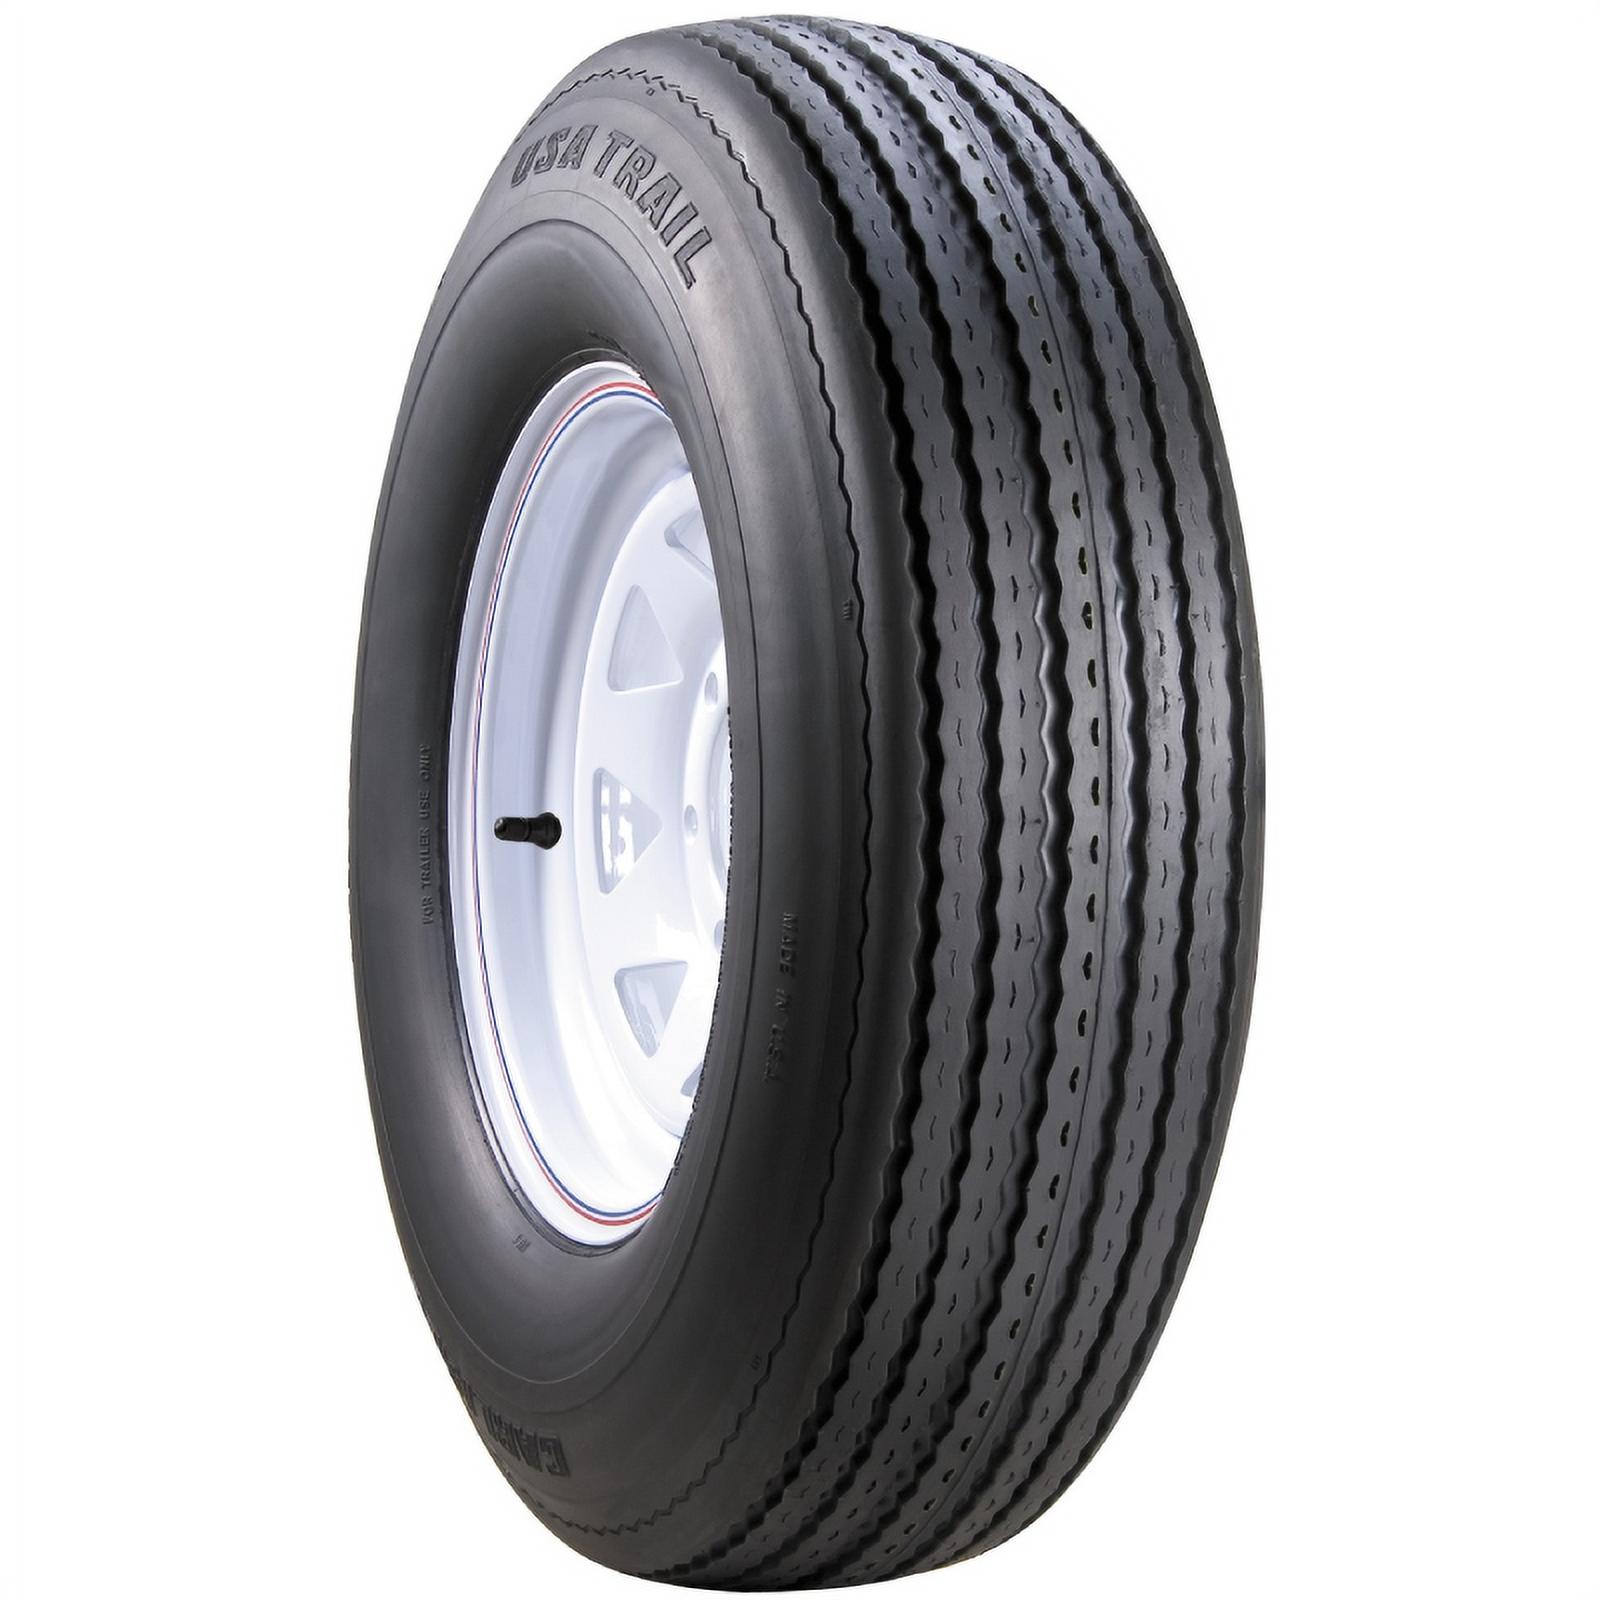 Carlisle USA Trail Bias Trailer Tire - ST175/80D13 LRC 6PLY Rated - image 2 of 2